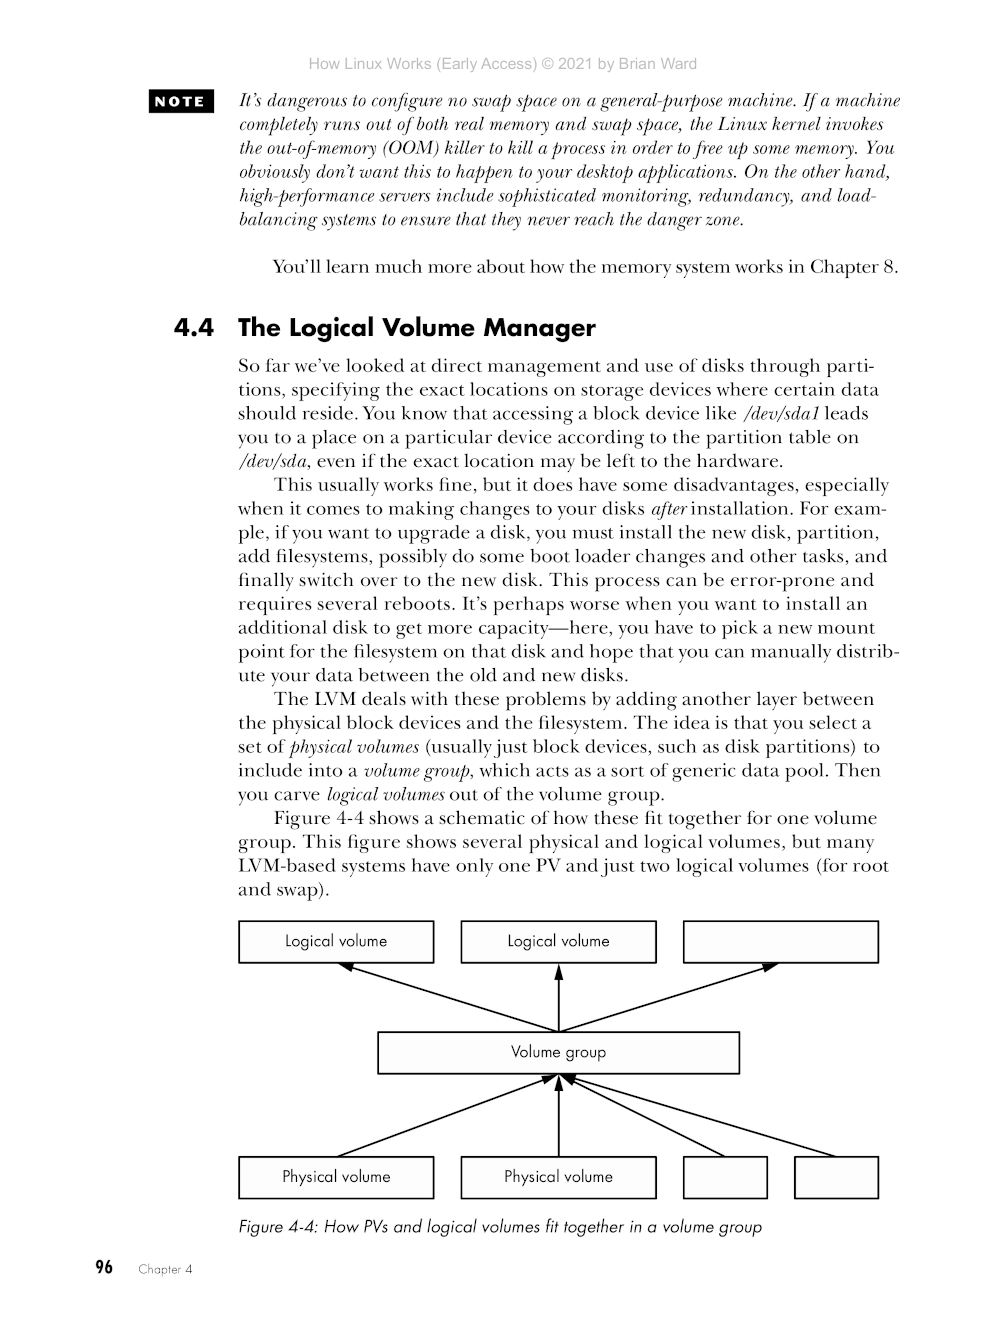 How Linux Works 3rd Edition Page 96